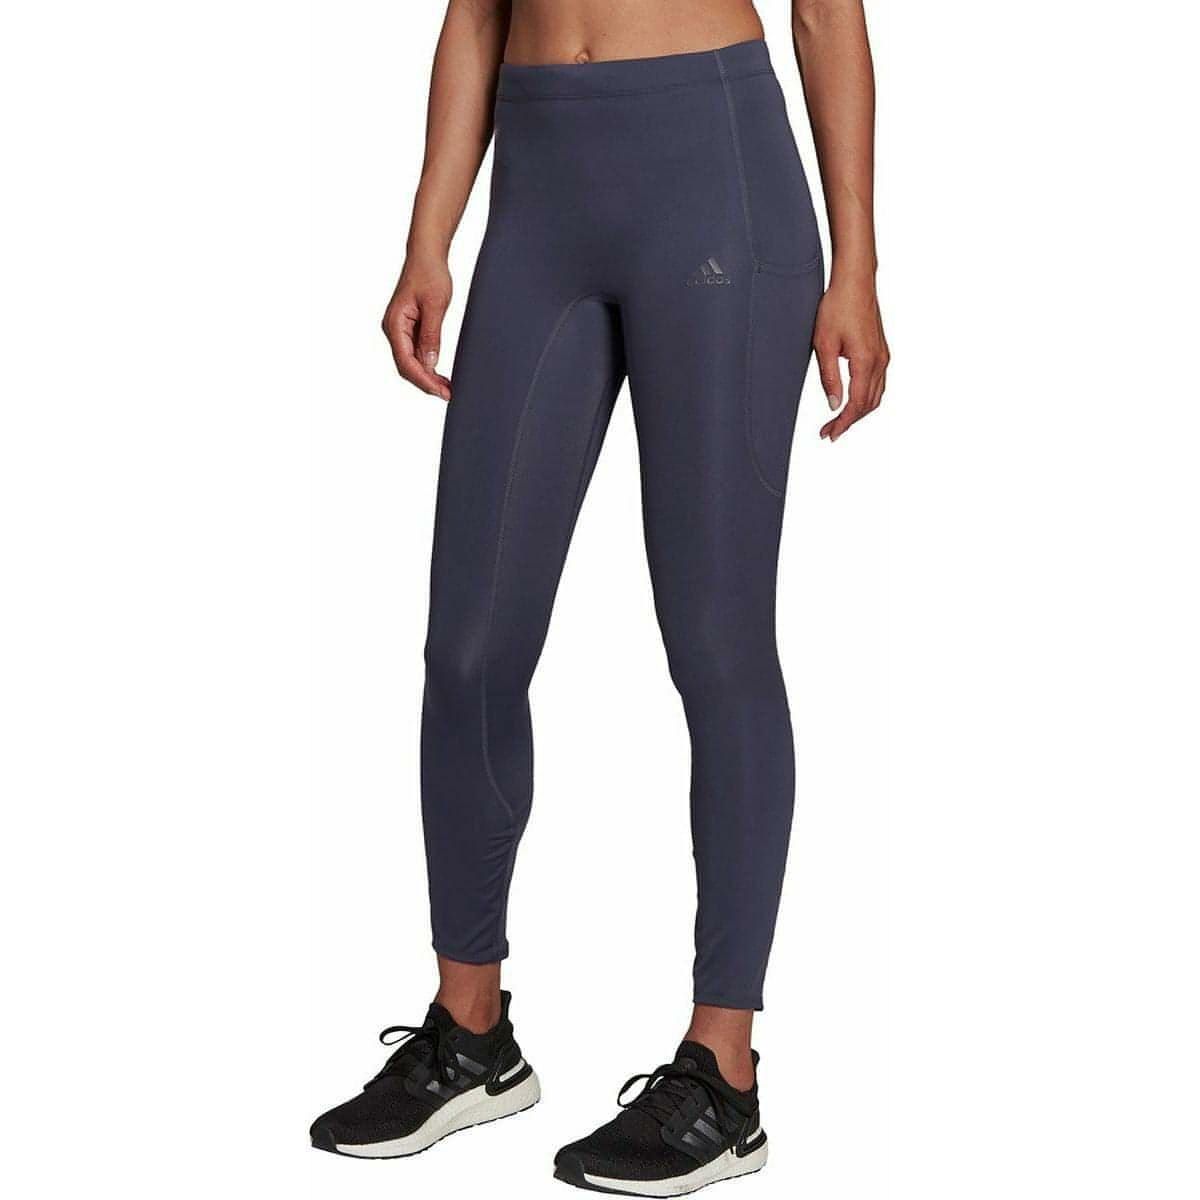 On Women's Performance Tights 7/8 in Black, Size: Large  Running tights  women, Performance leggings, Running tights